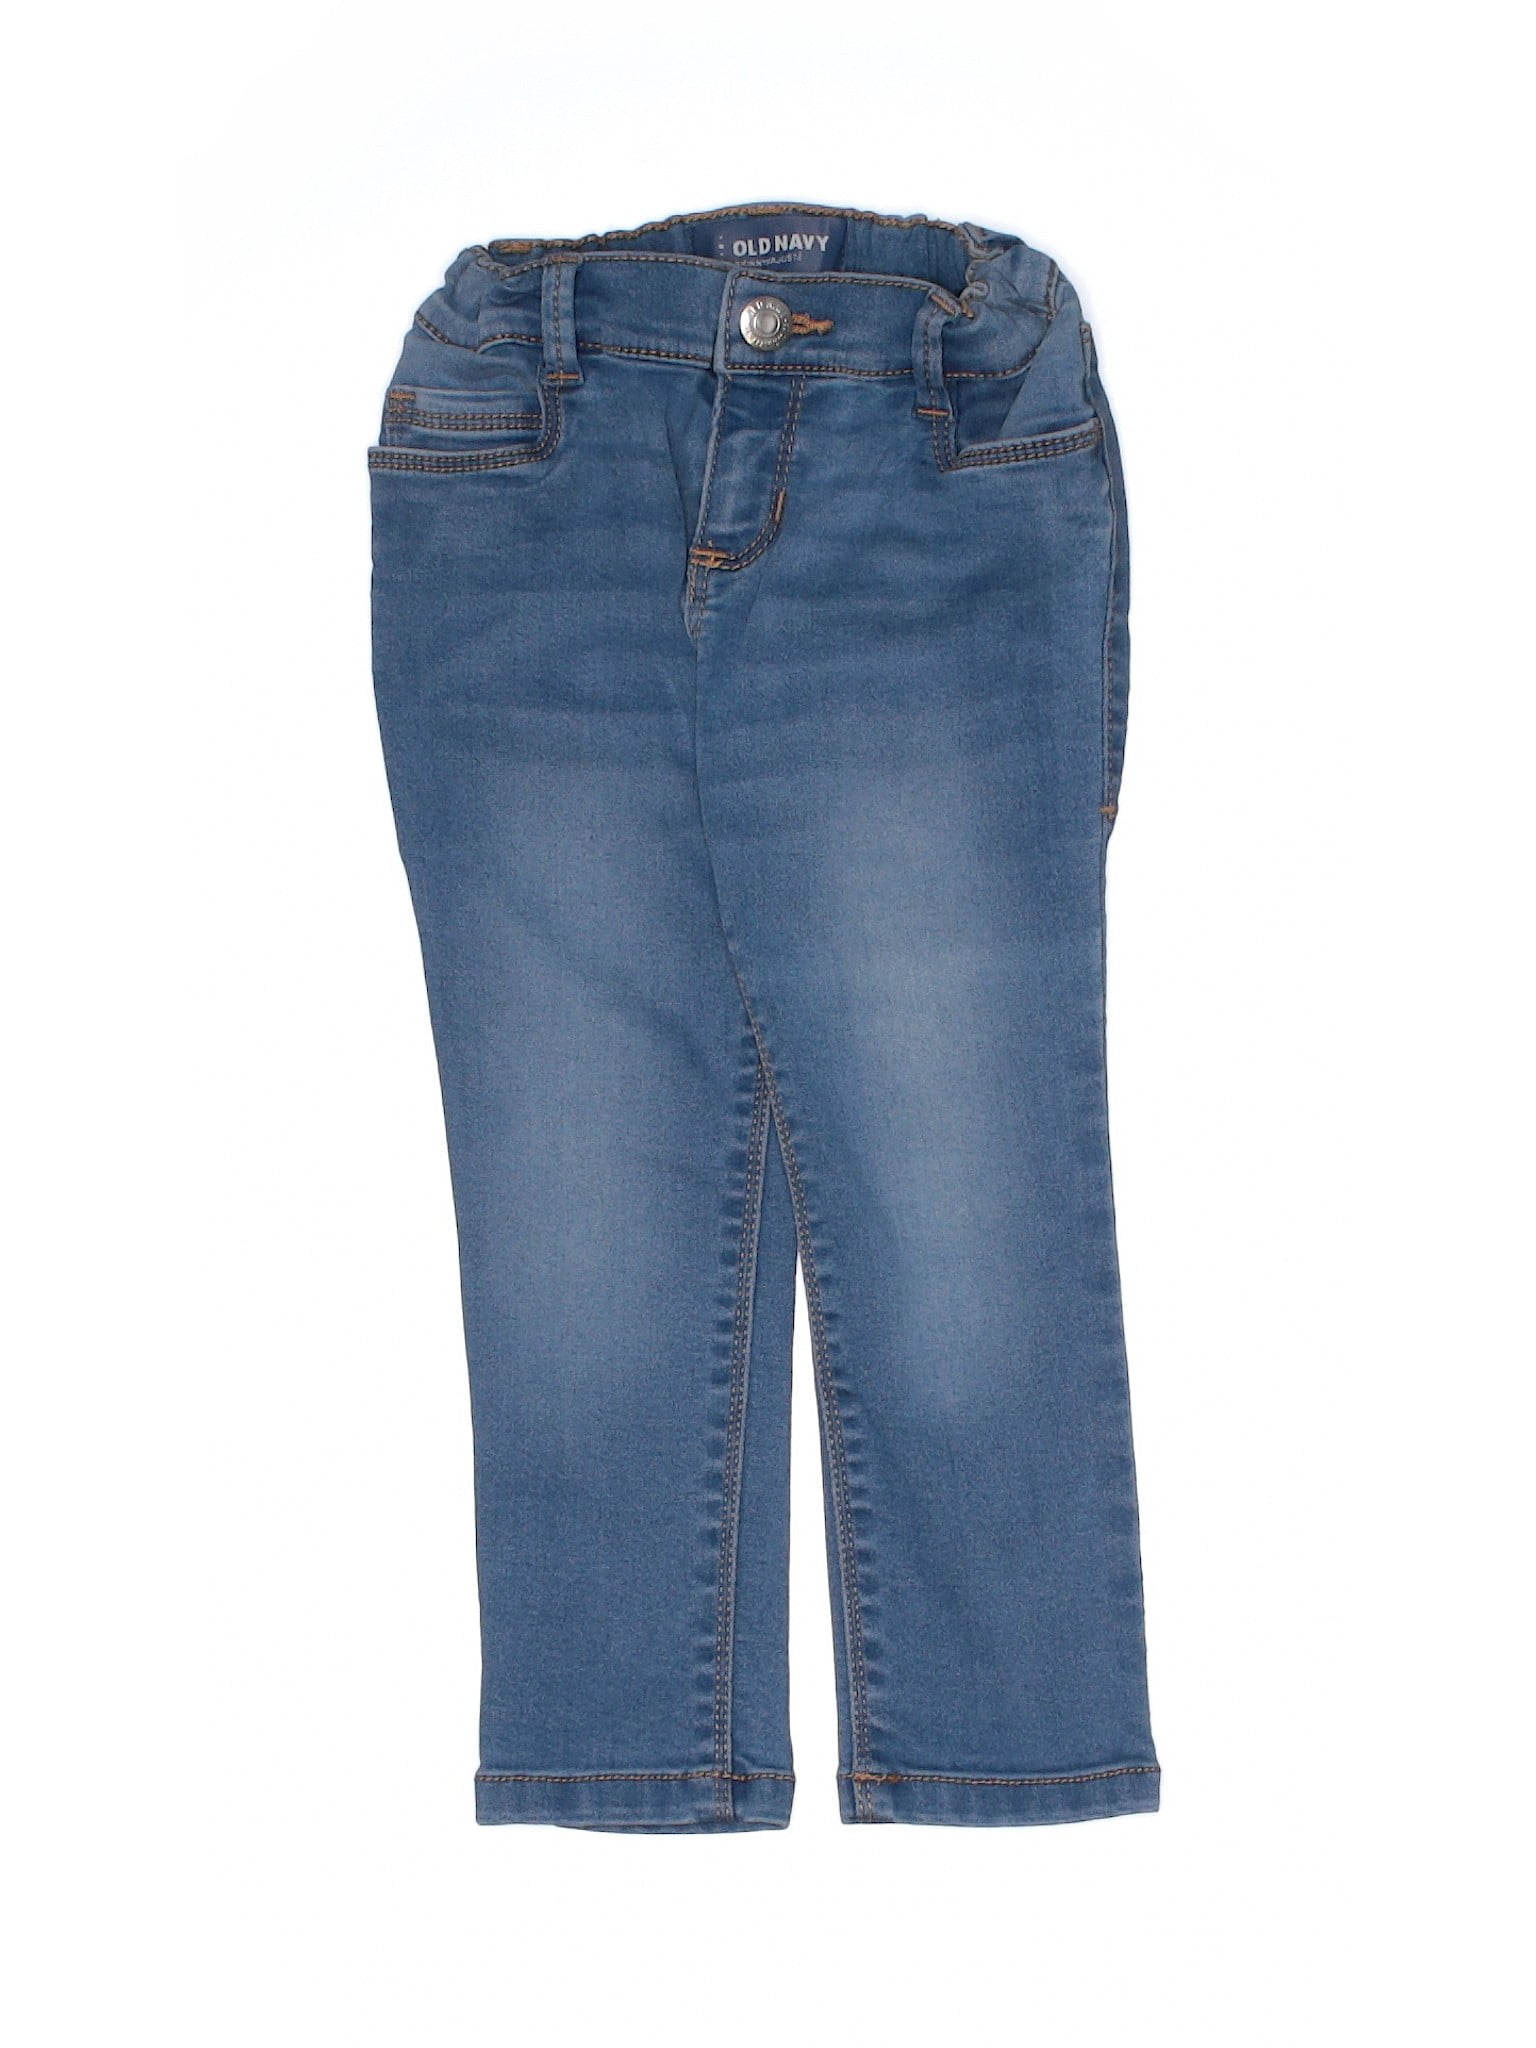 Old Navy - Pre-Owned Old Navy Girl's Size 3T Jeans - Walmart.com ...